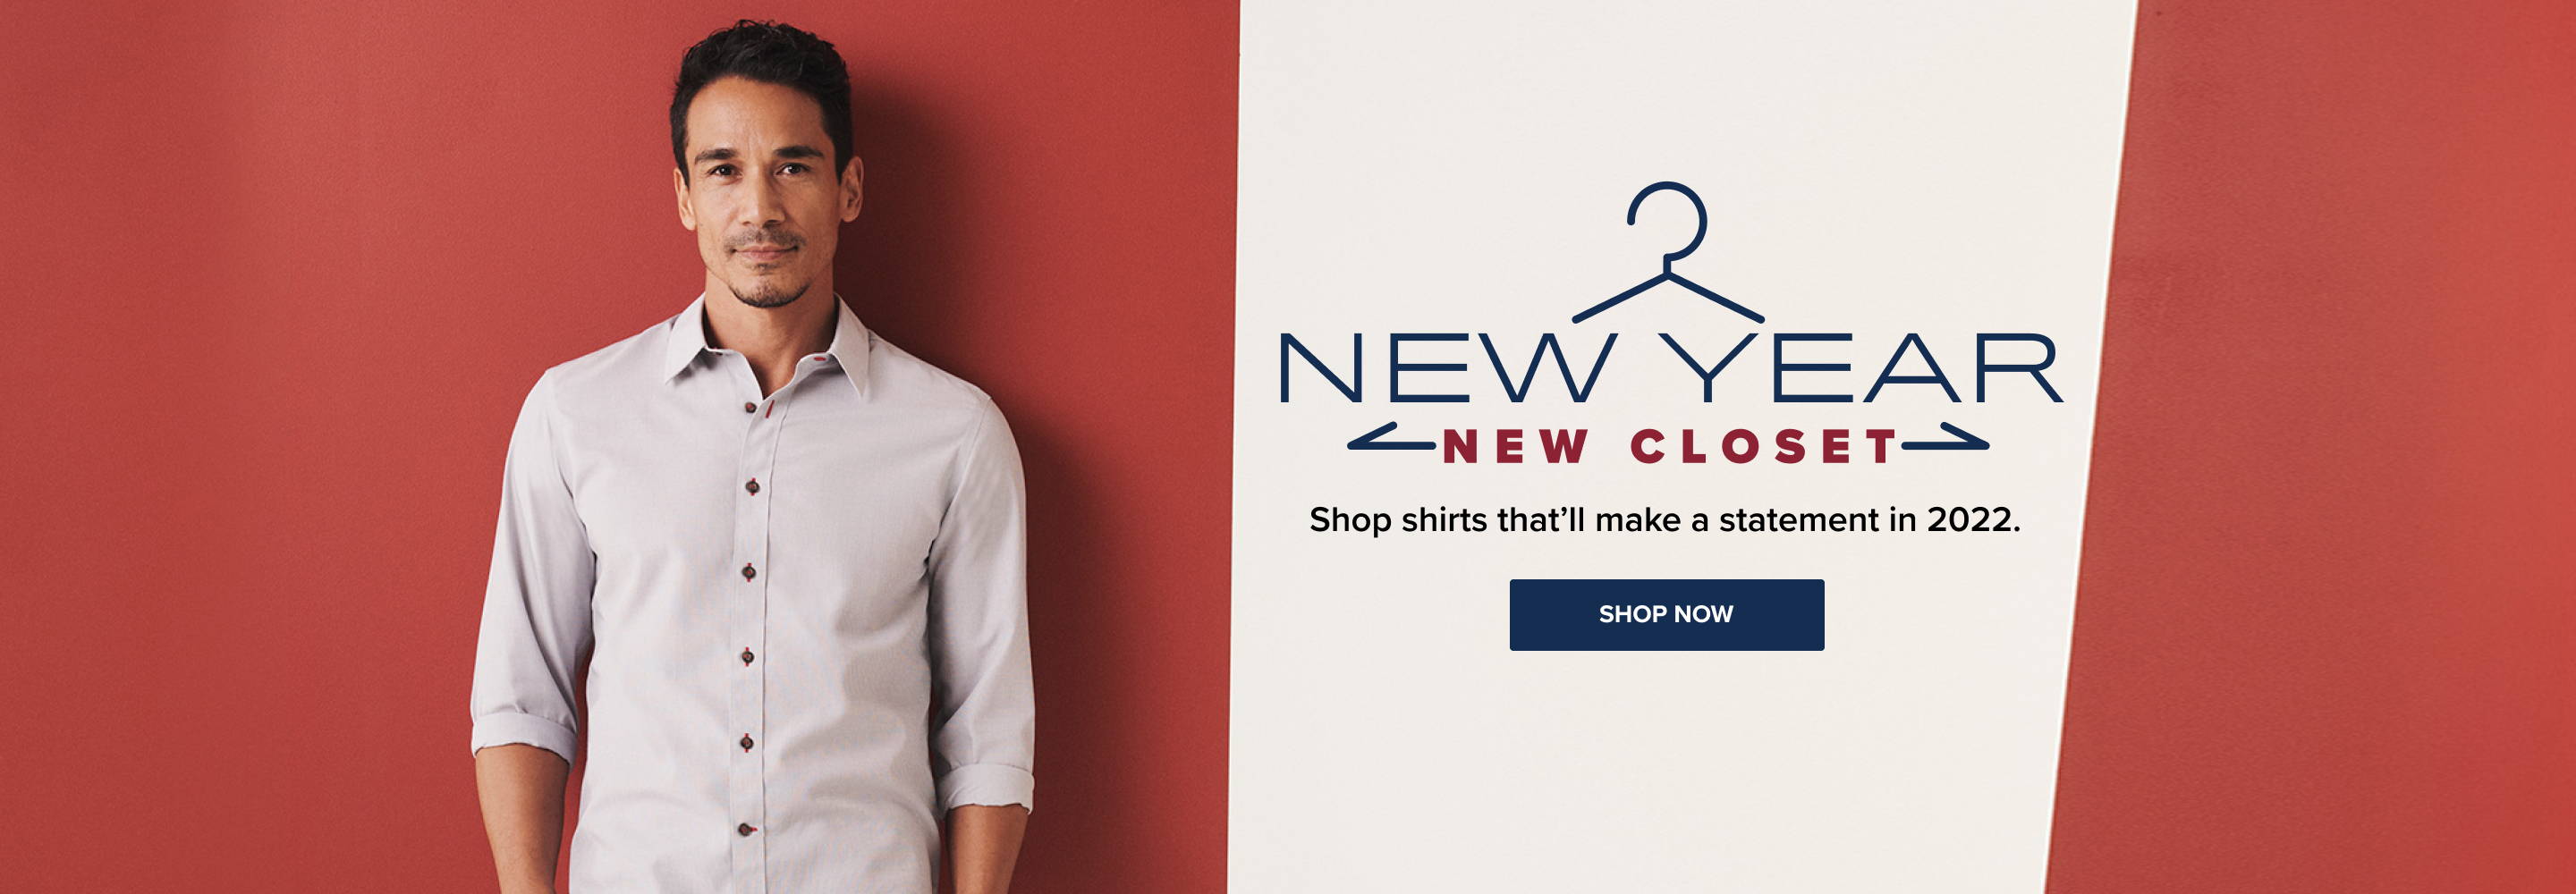 New year new closet. Shop shirts that'll make a statemesnt in 2022